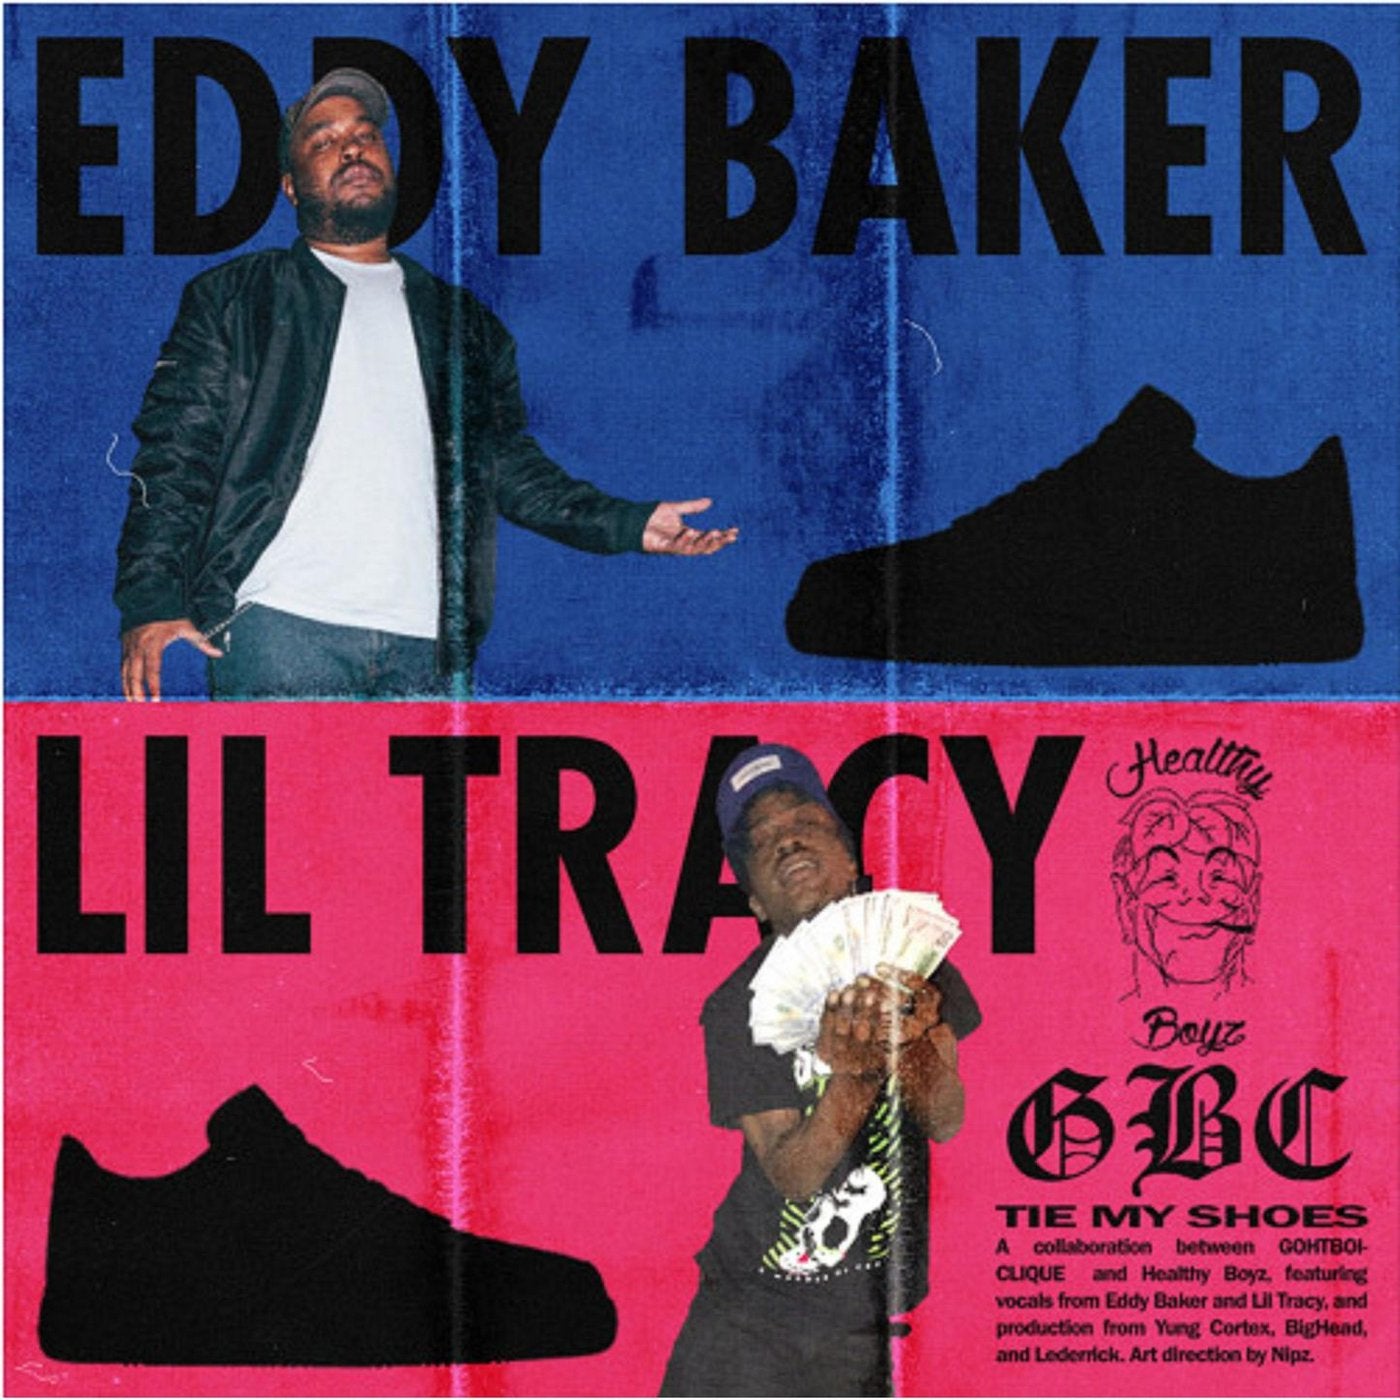 Tie My Shoes Ft Lil Tracy & Eddy Baker